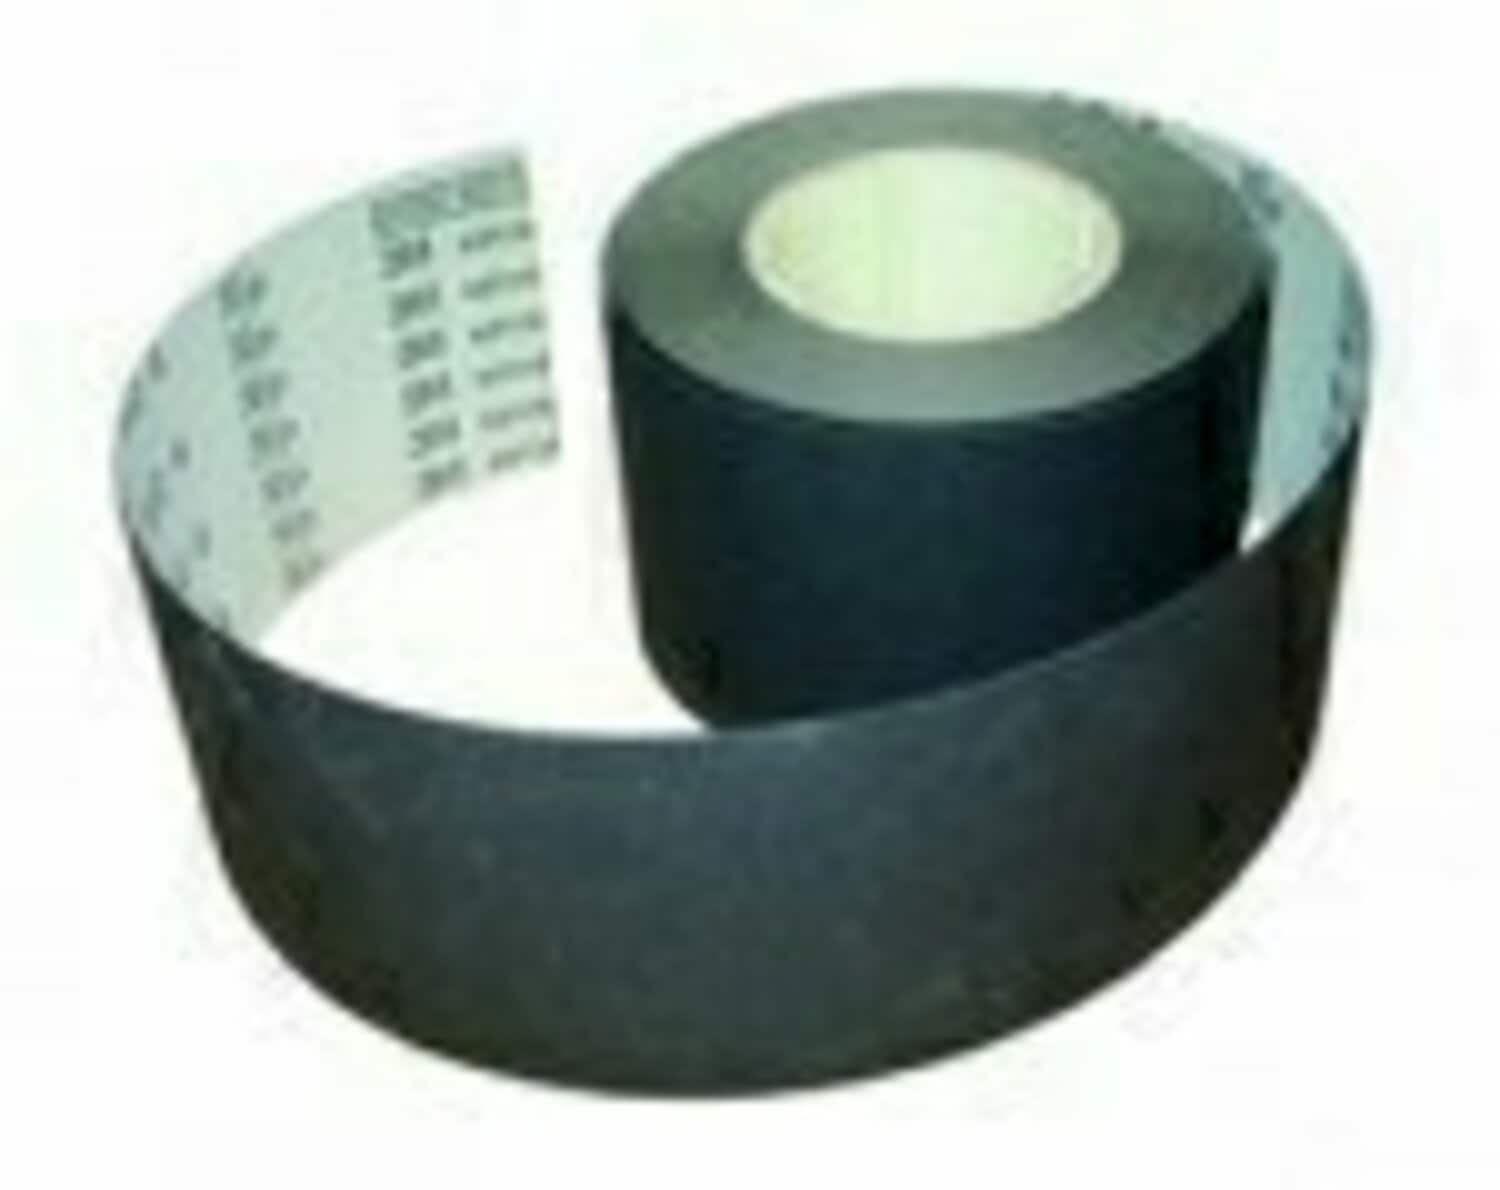 7010509973 - 3M Microfinishing Film Roll 472L, 15 Mic 5MIL, Type E, 8 in x 150 ft x
3 in (203.2mmx45.75m), Keyed Core, ASO